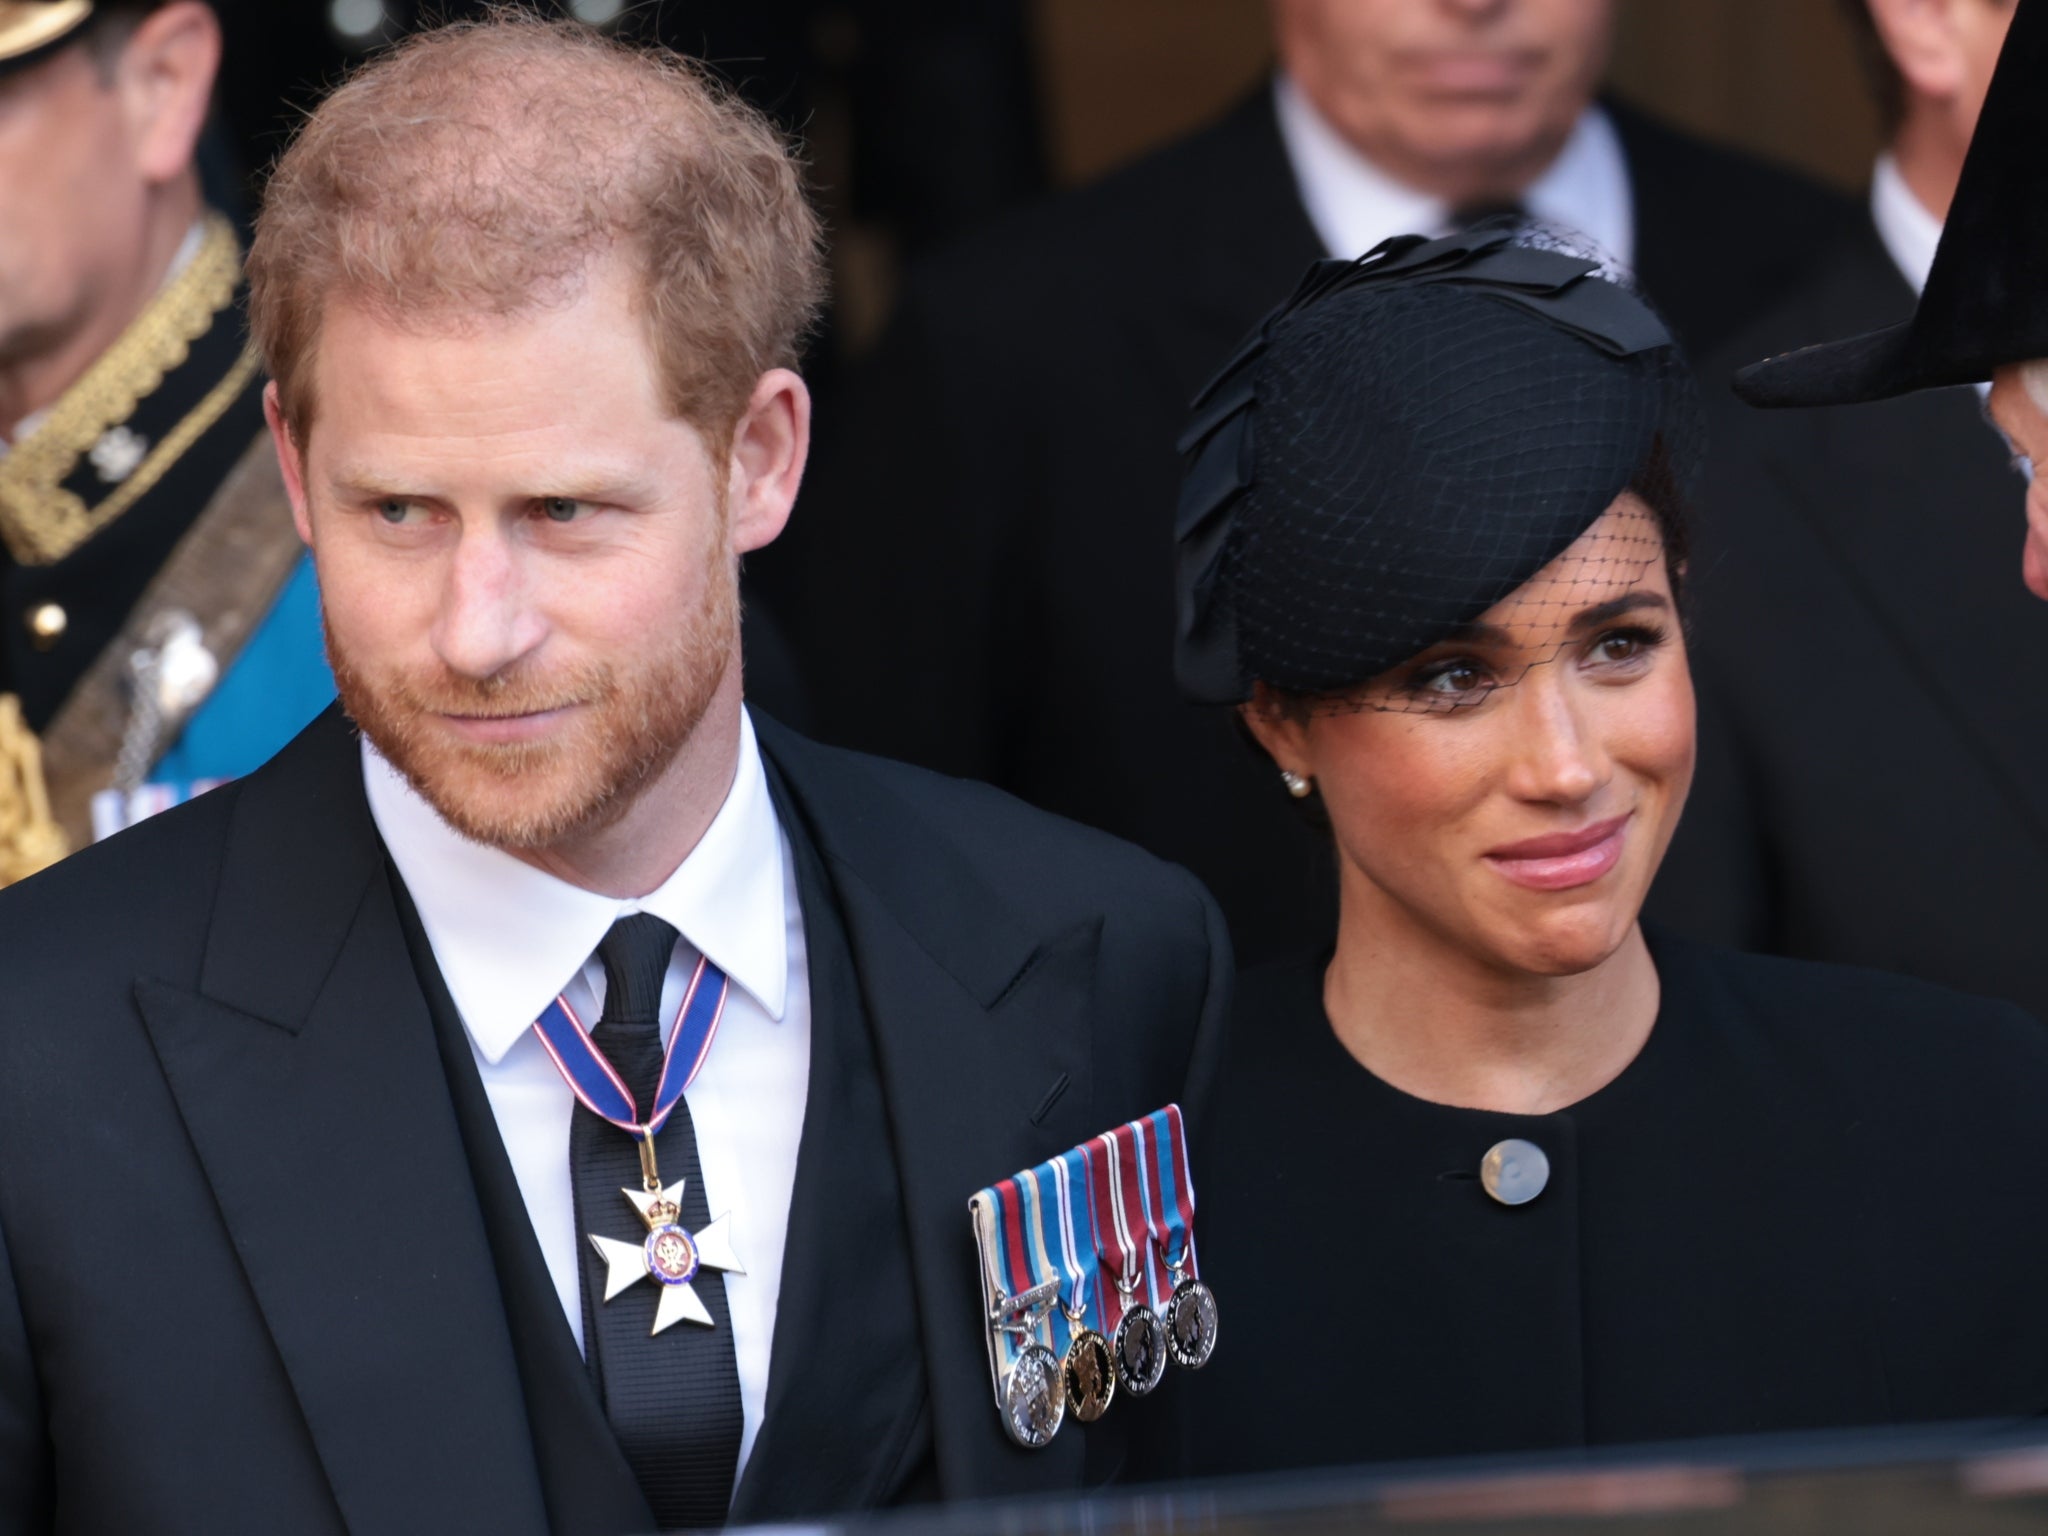 Prior to the Queen’s death, Meghan had launched her podcast